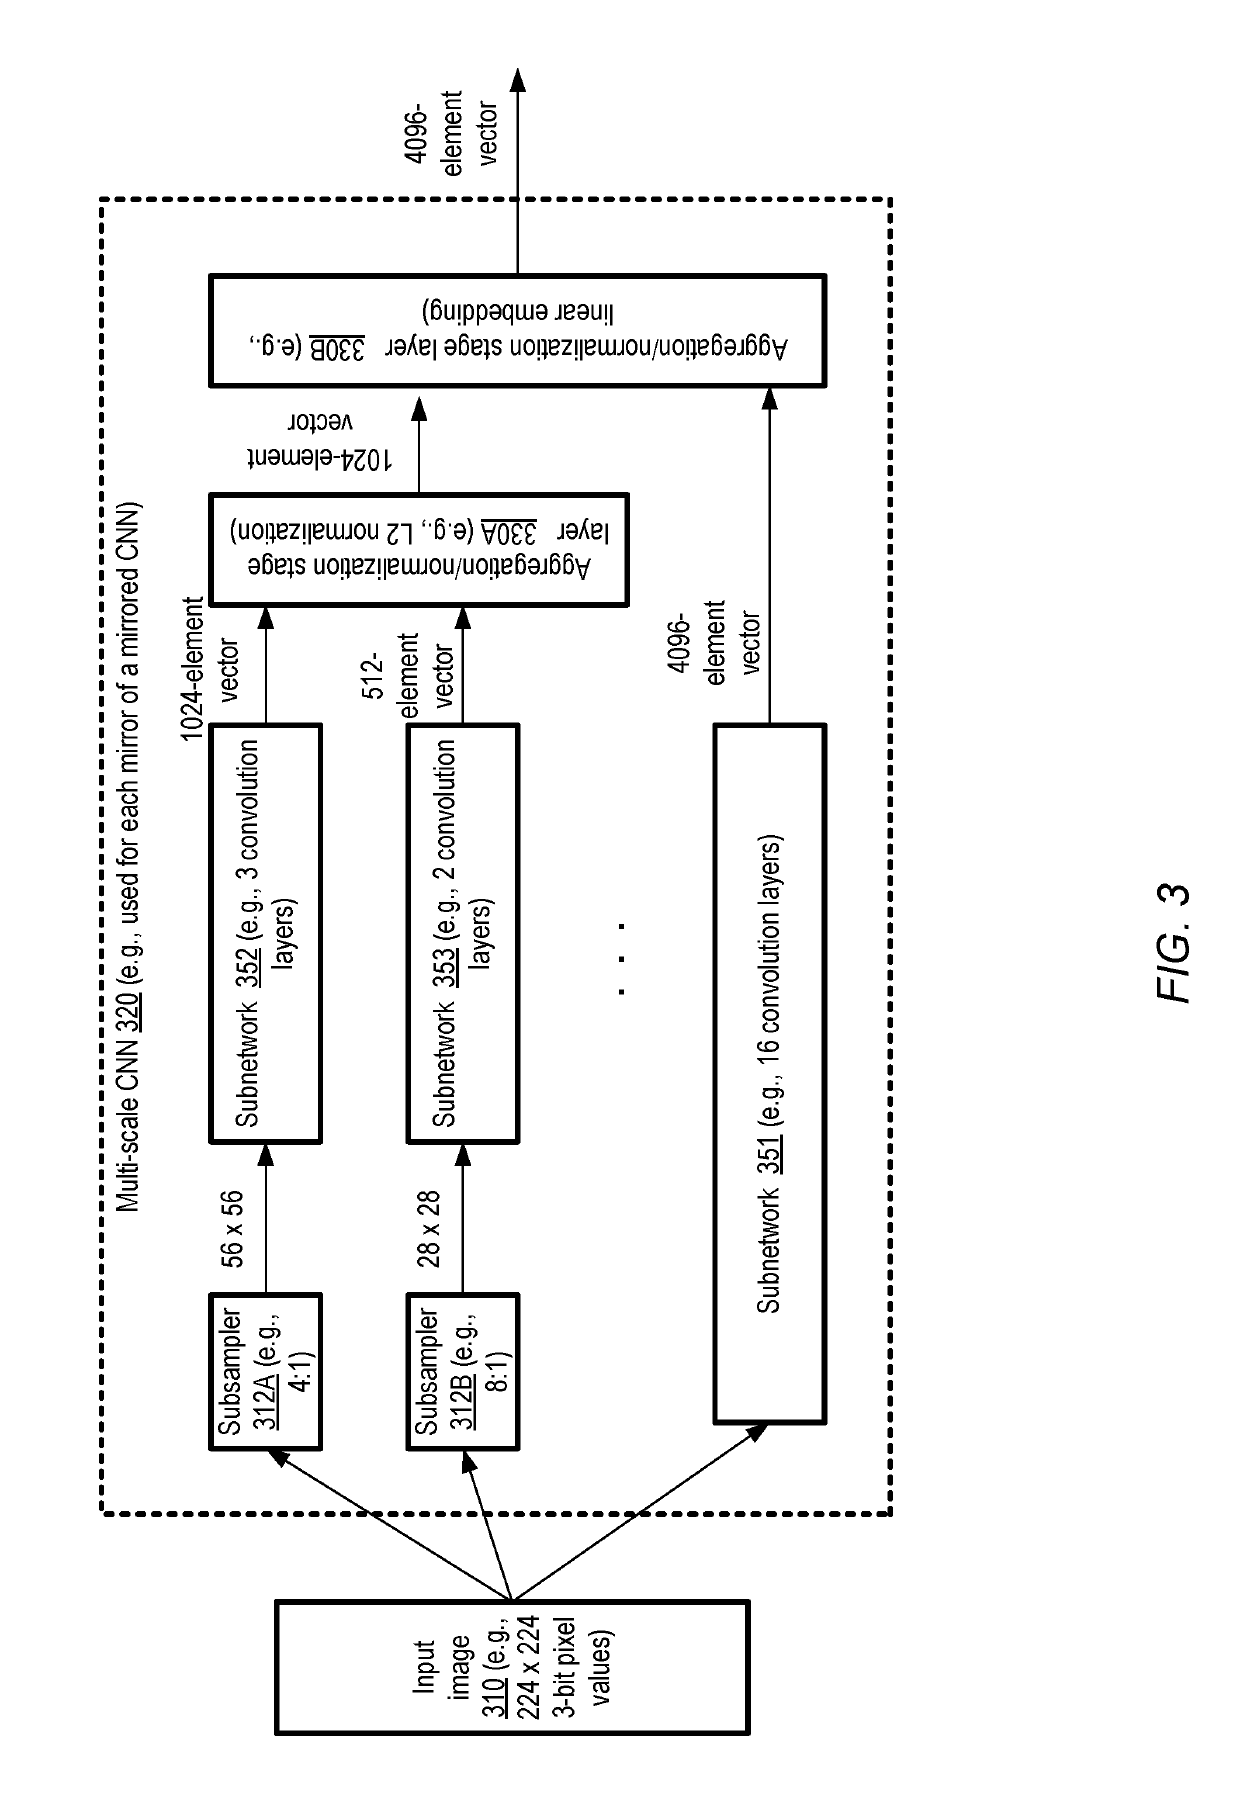 Artificial intelligence system for image similarity analysis using optimized image pair selection and multi-scale convolutional neural networks